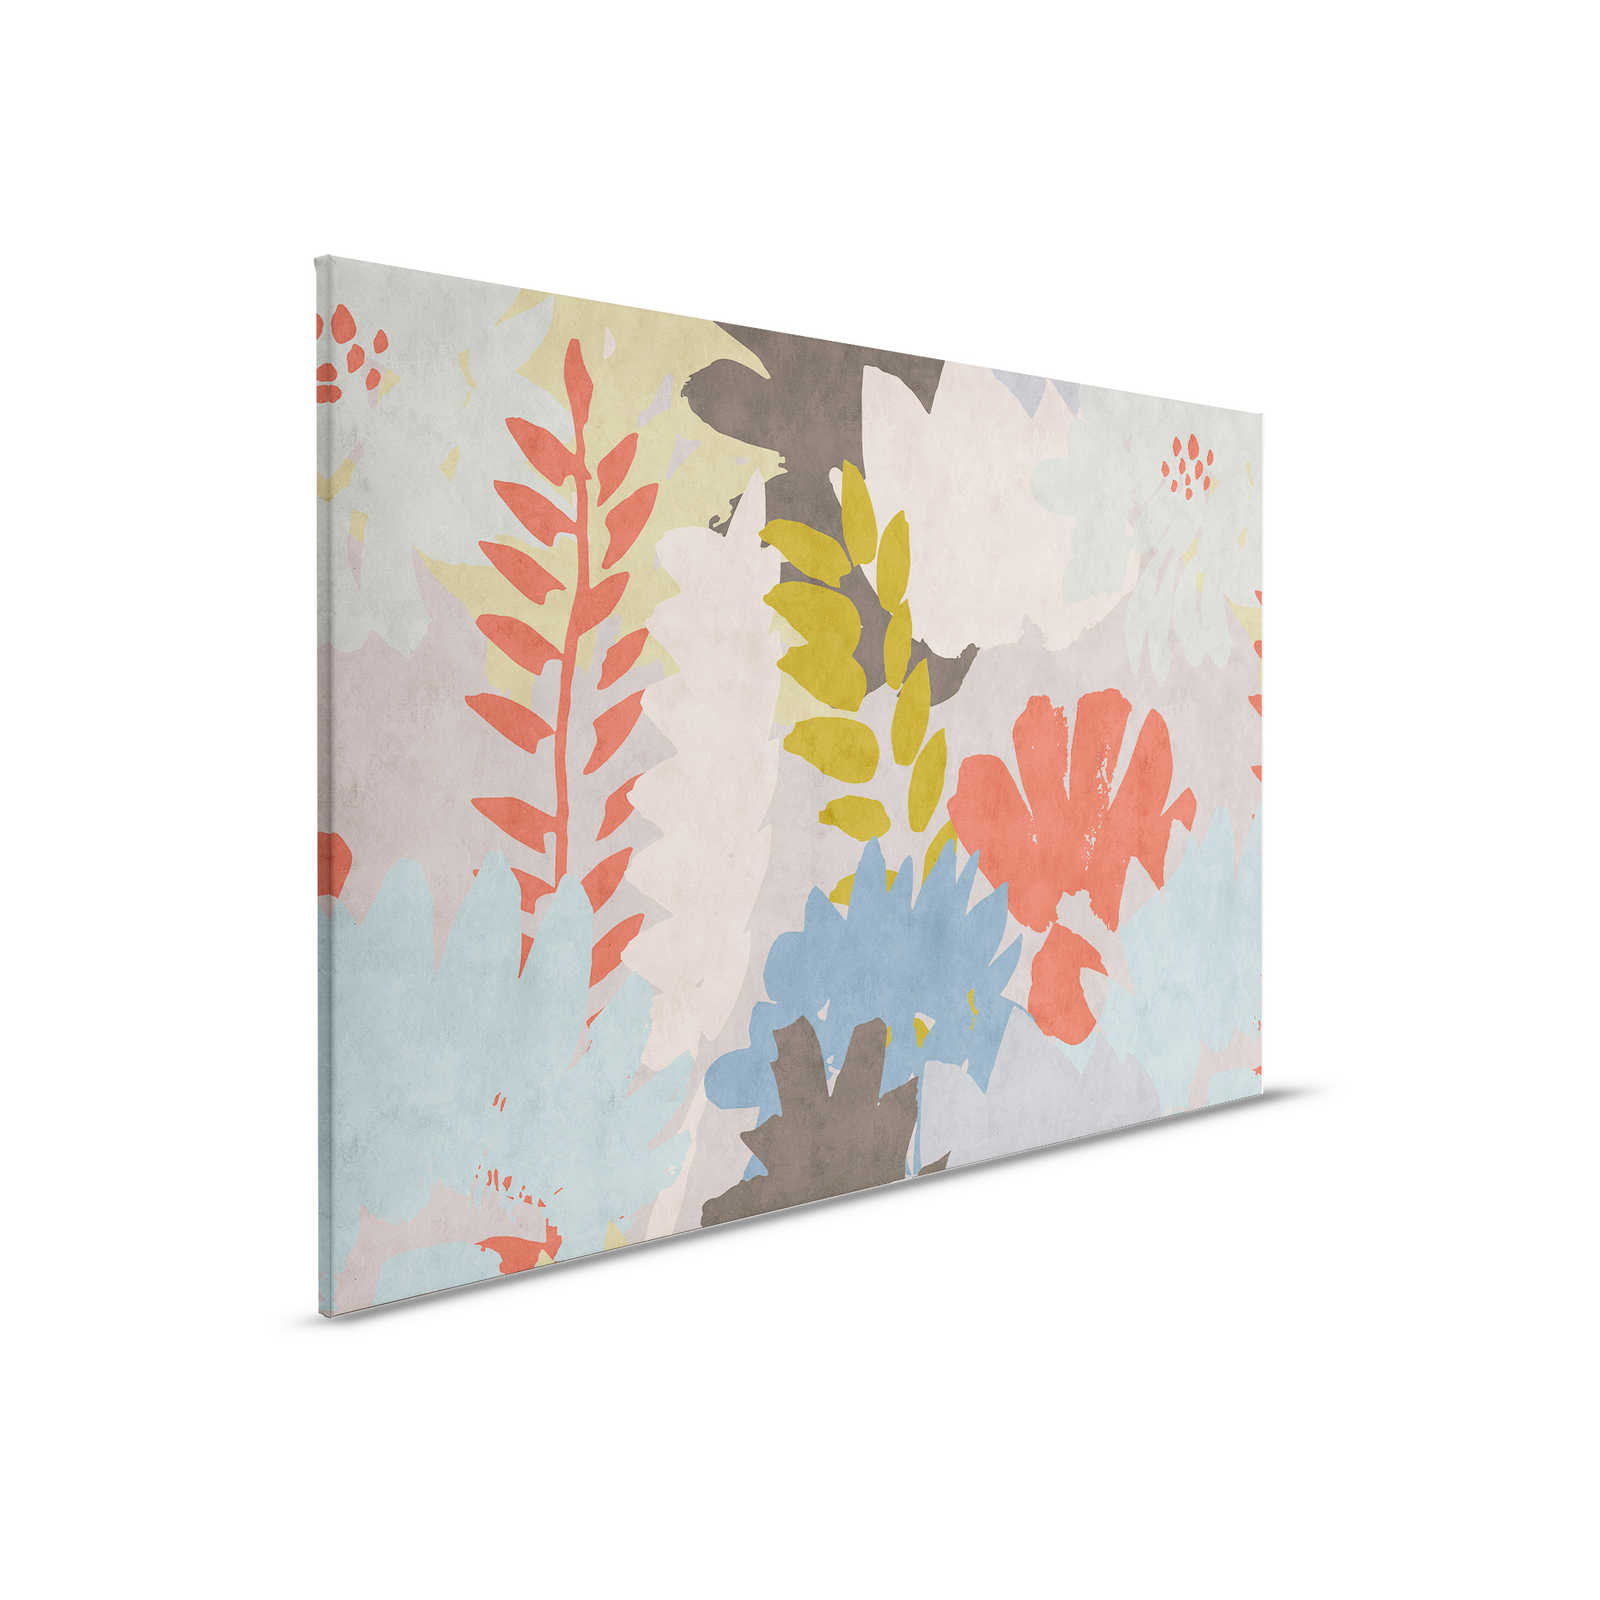         Floral Collage 3 - Abstract canvas picture in blotting paper structure with leaf motif - 0.90 m x 0.60 m
    